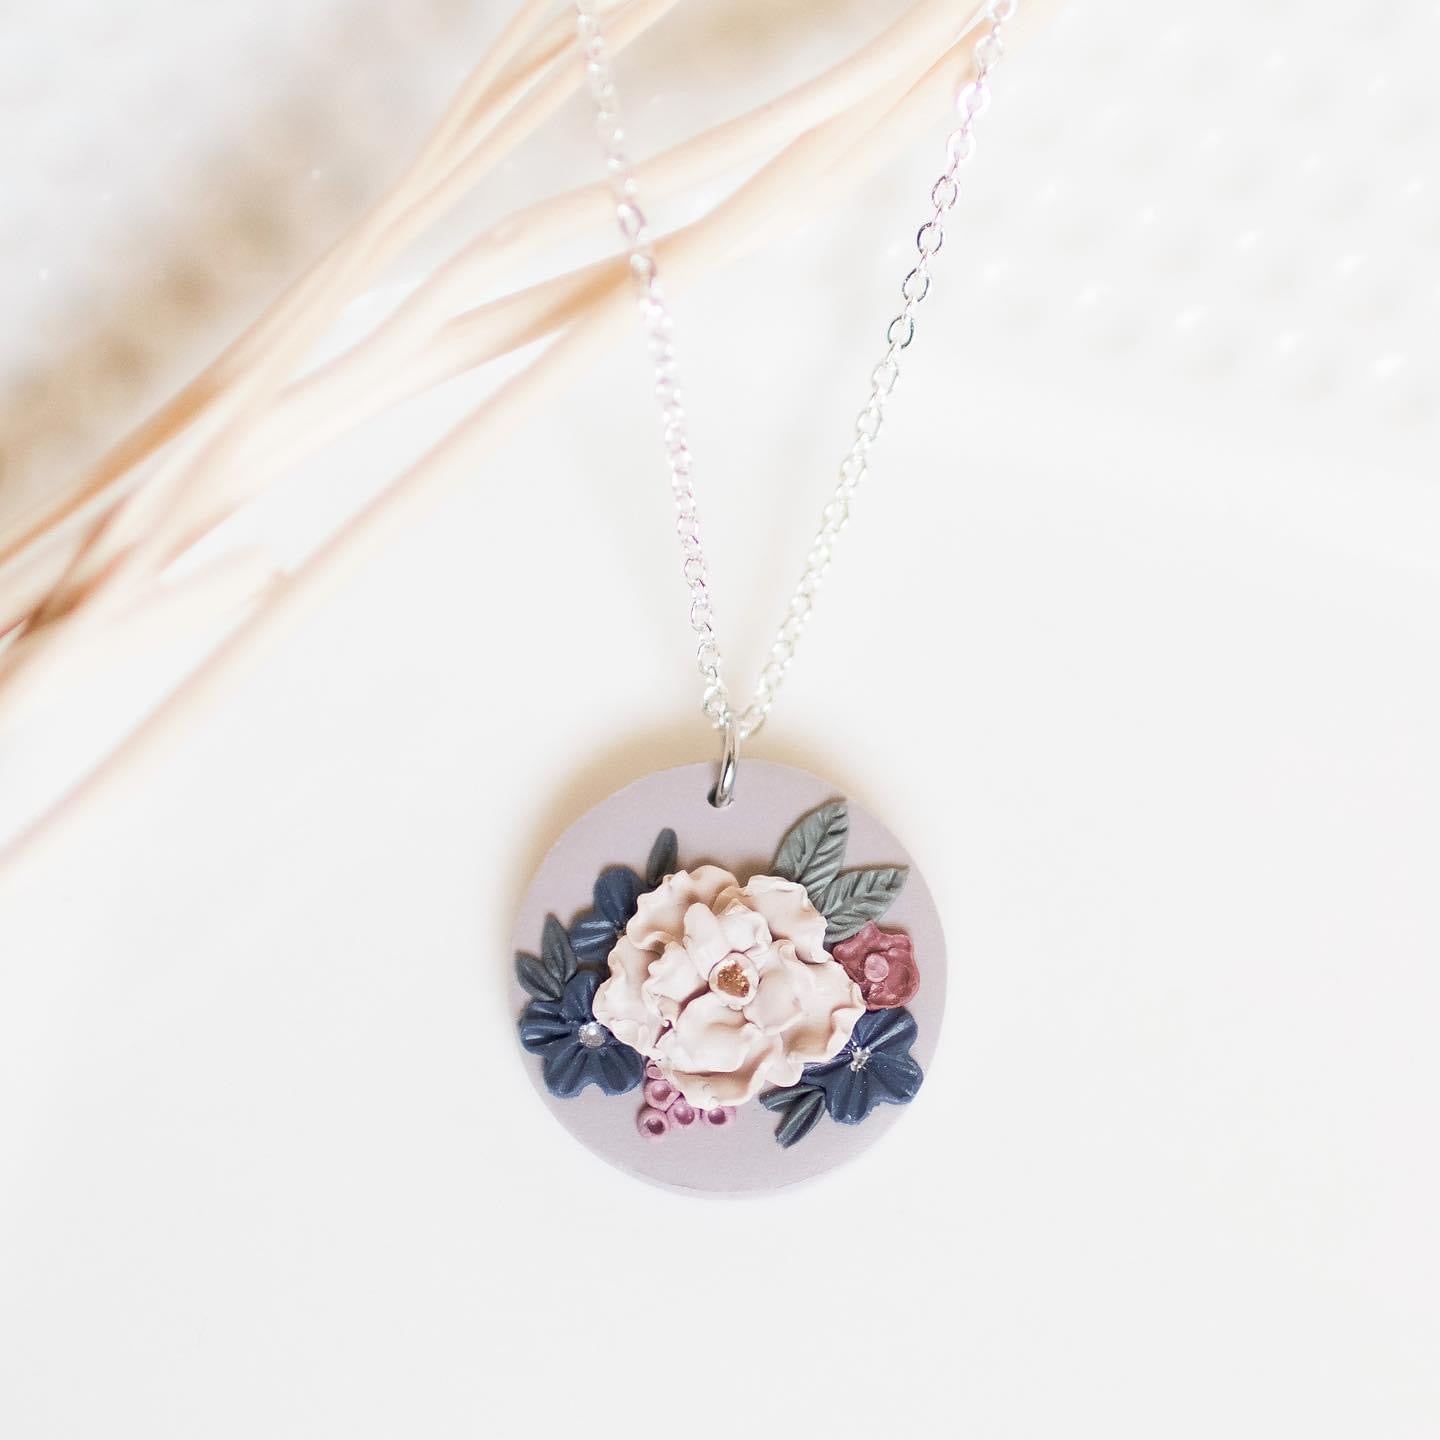 KLE-25 Floral Clay Necklace “Silver”